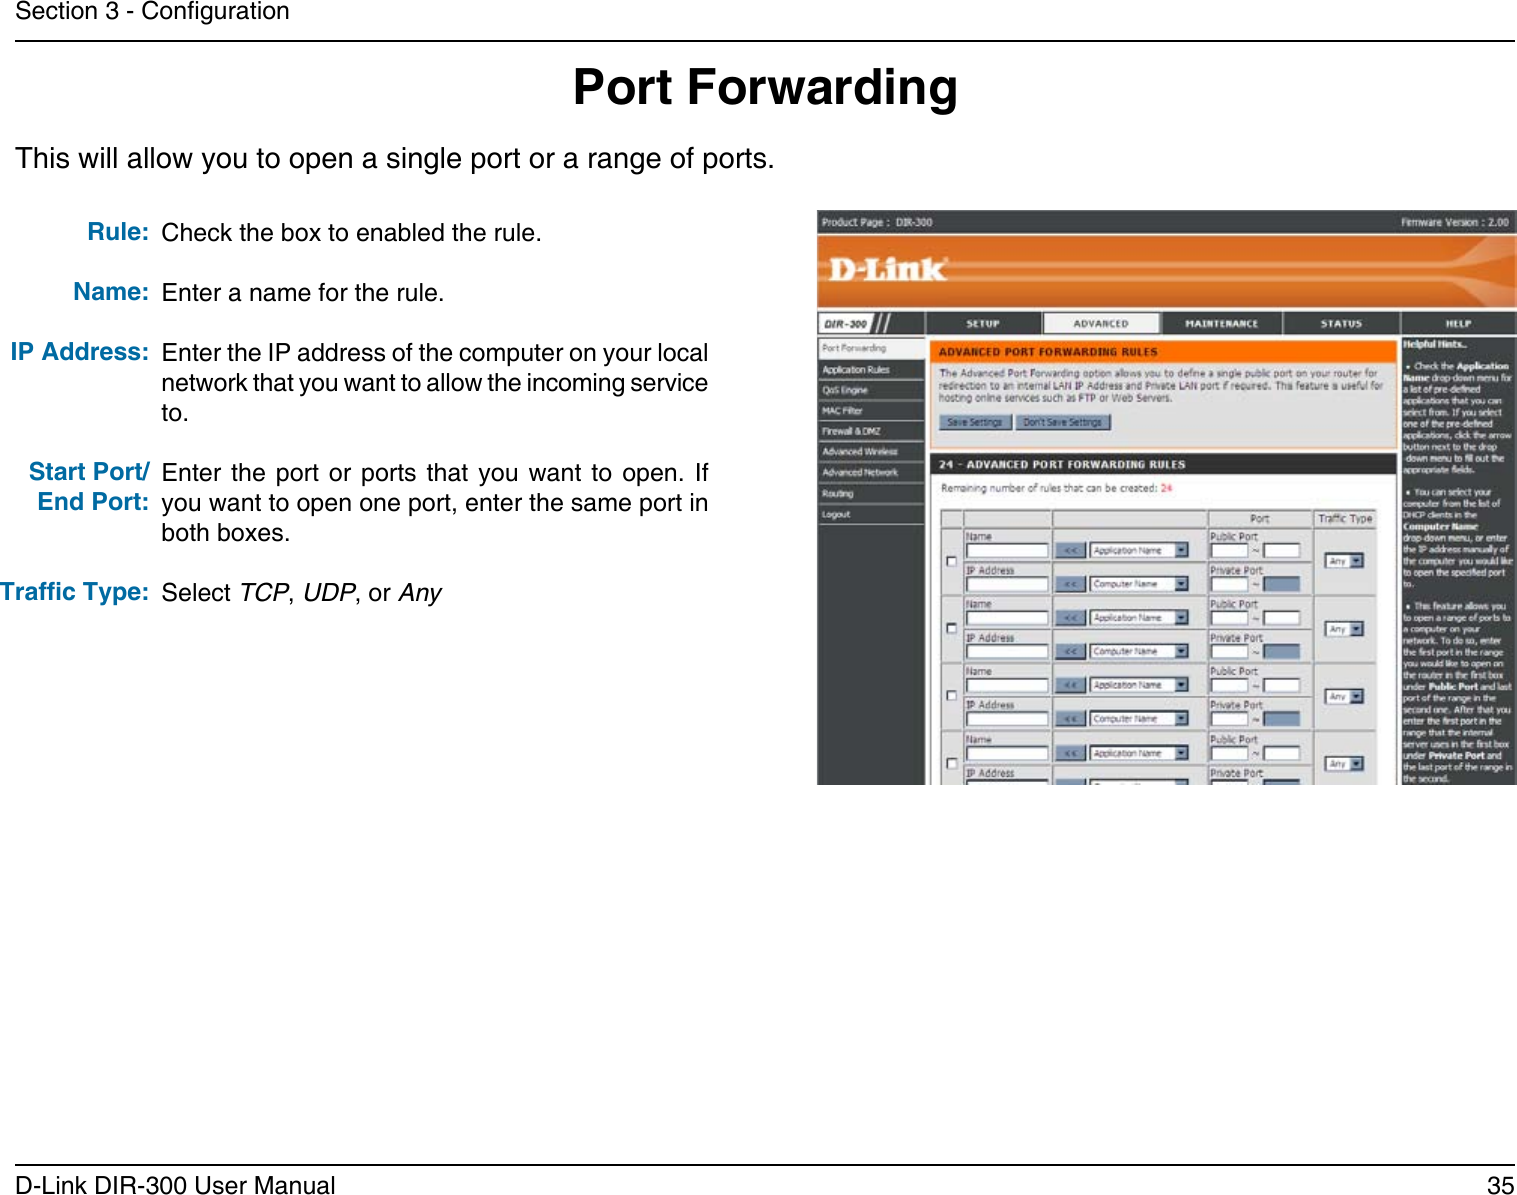 35D-Link DIR-300 User ManualSection 3 - CongurationPort ForwardingThis will allow you to open a single port or a range of ports.Check the box to enabled the rule. Enter a name for the rule.Enter the IP address of the computer on your local network that you want to allow the incoming service to.Enter  the  port or  ports  that  you  want to  open.  If you want to open one port, enter the same port in both boxes.Select TCP, UDP, or AnyRule:Name:IP Address:Start Port/End Port:Trafc Type: